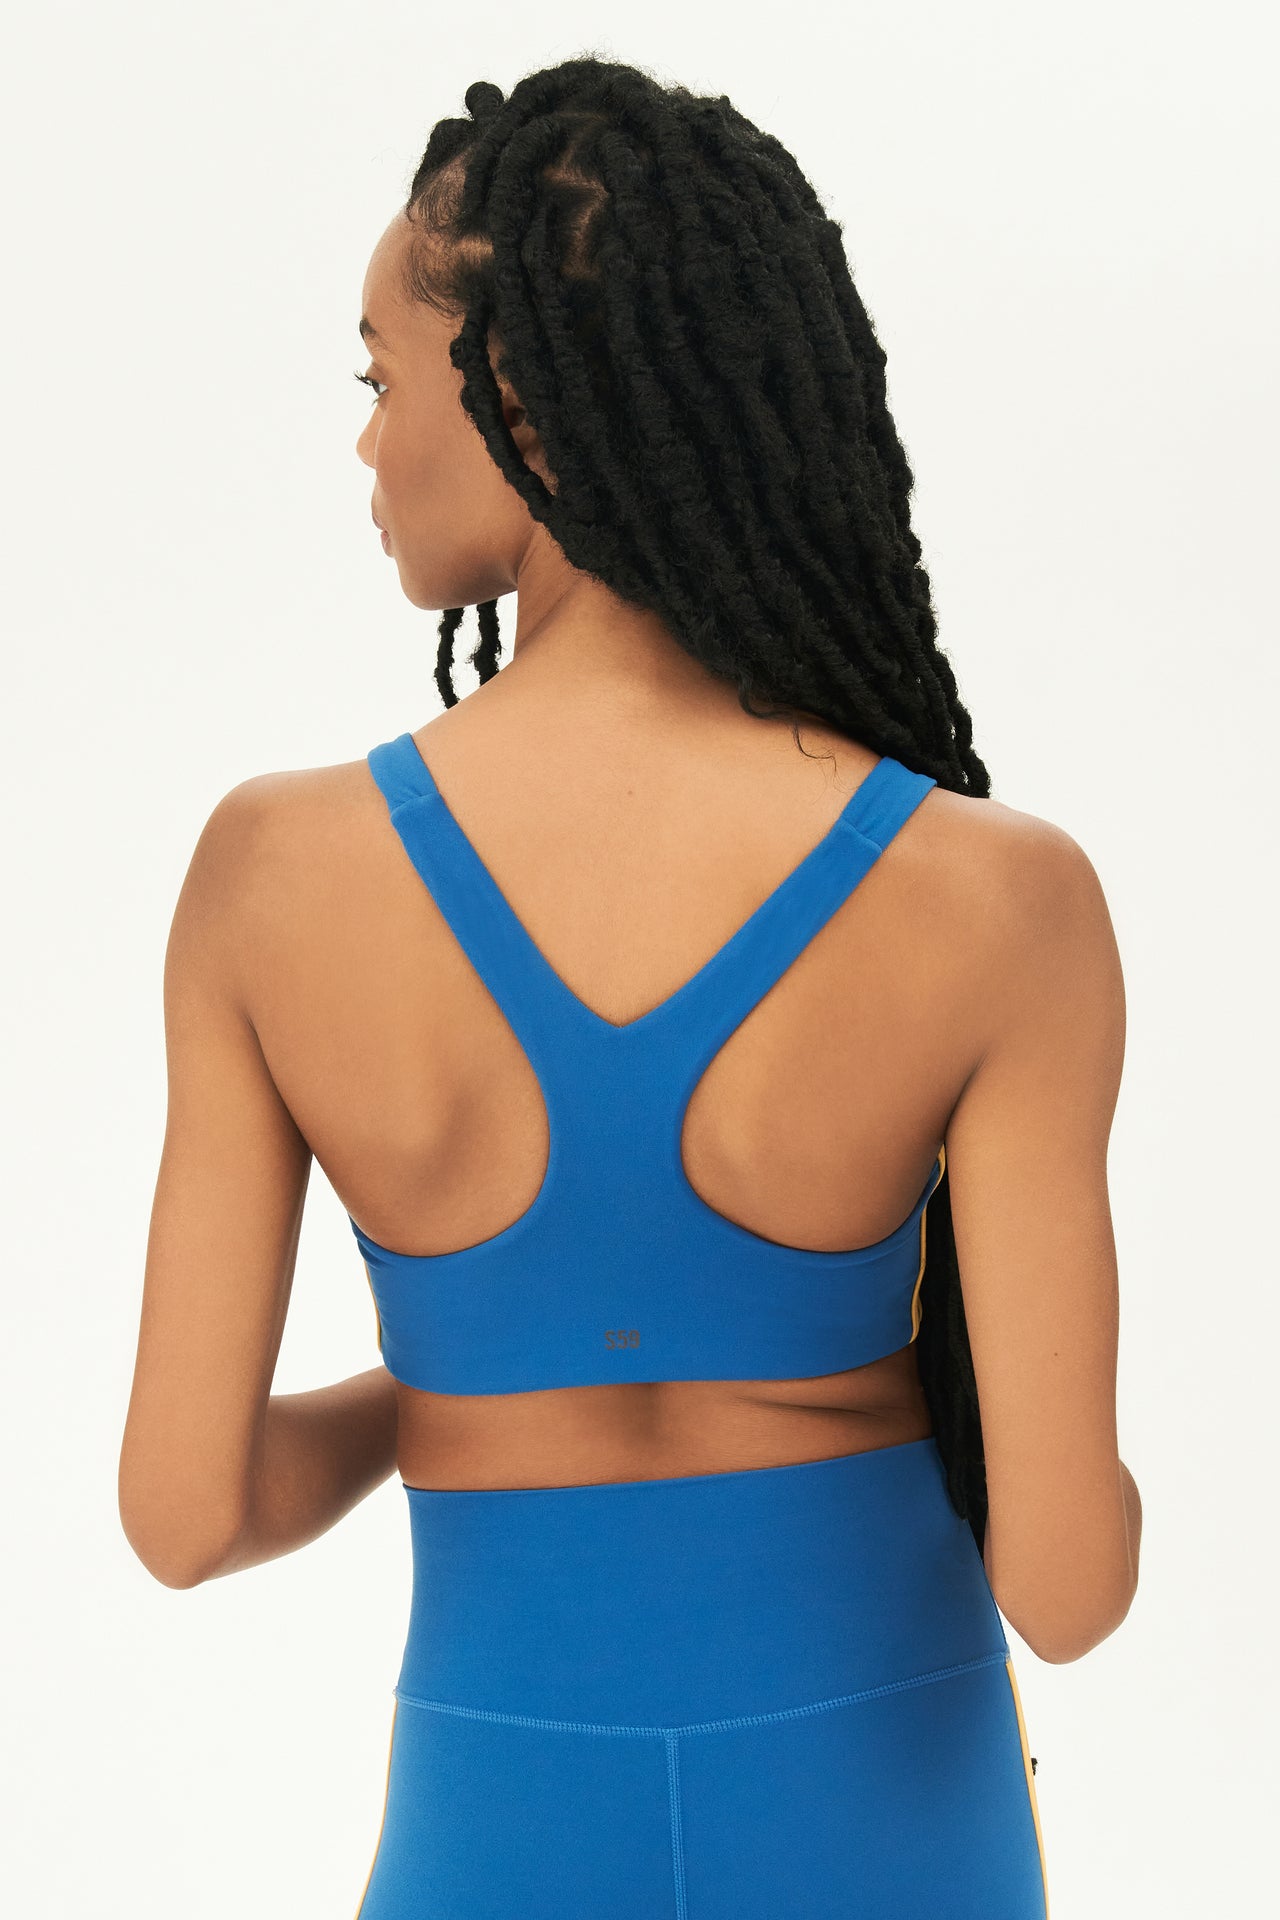 Back view of girl wearing blue sports bra with two thin yellow stripes down the side and blue leggings 